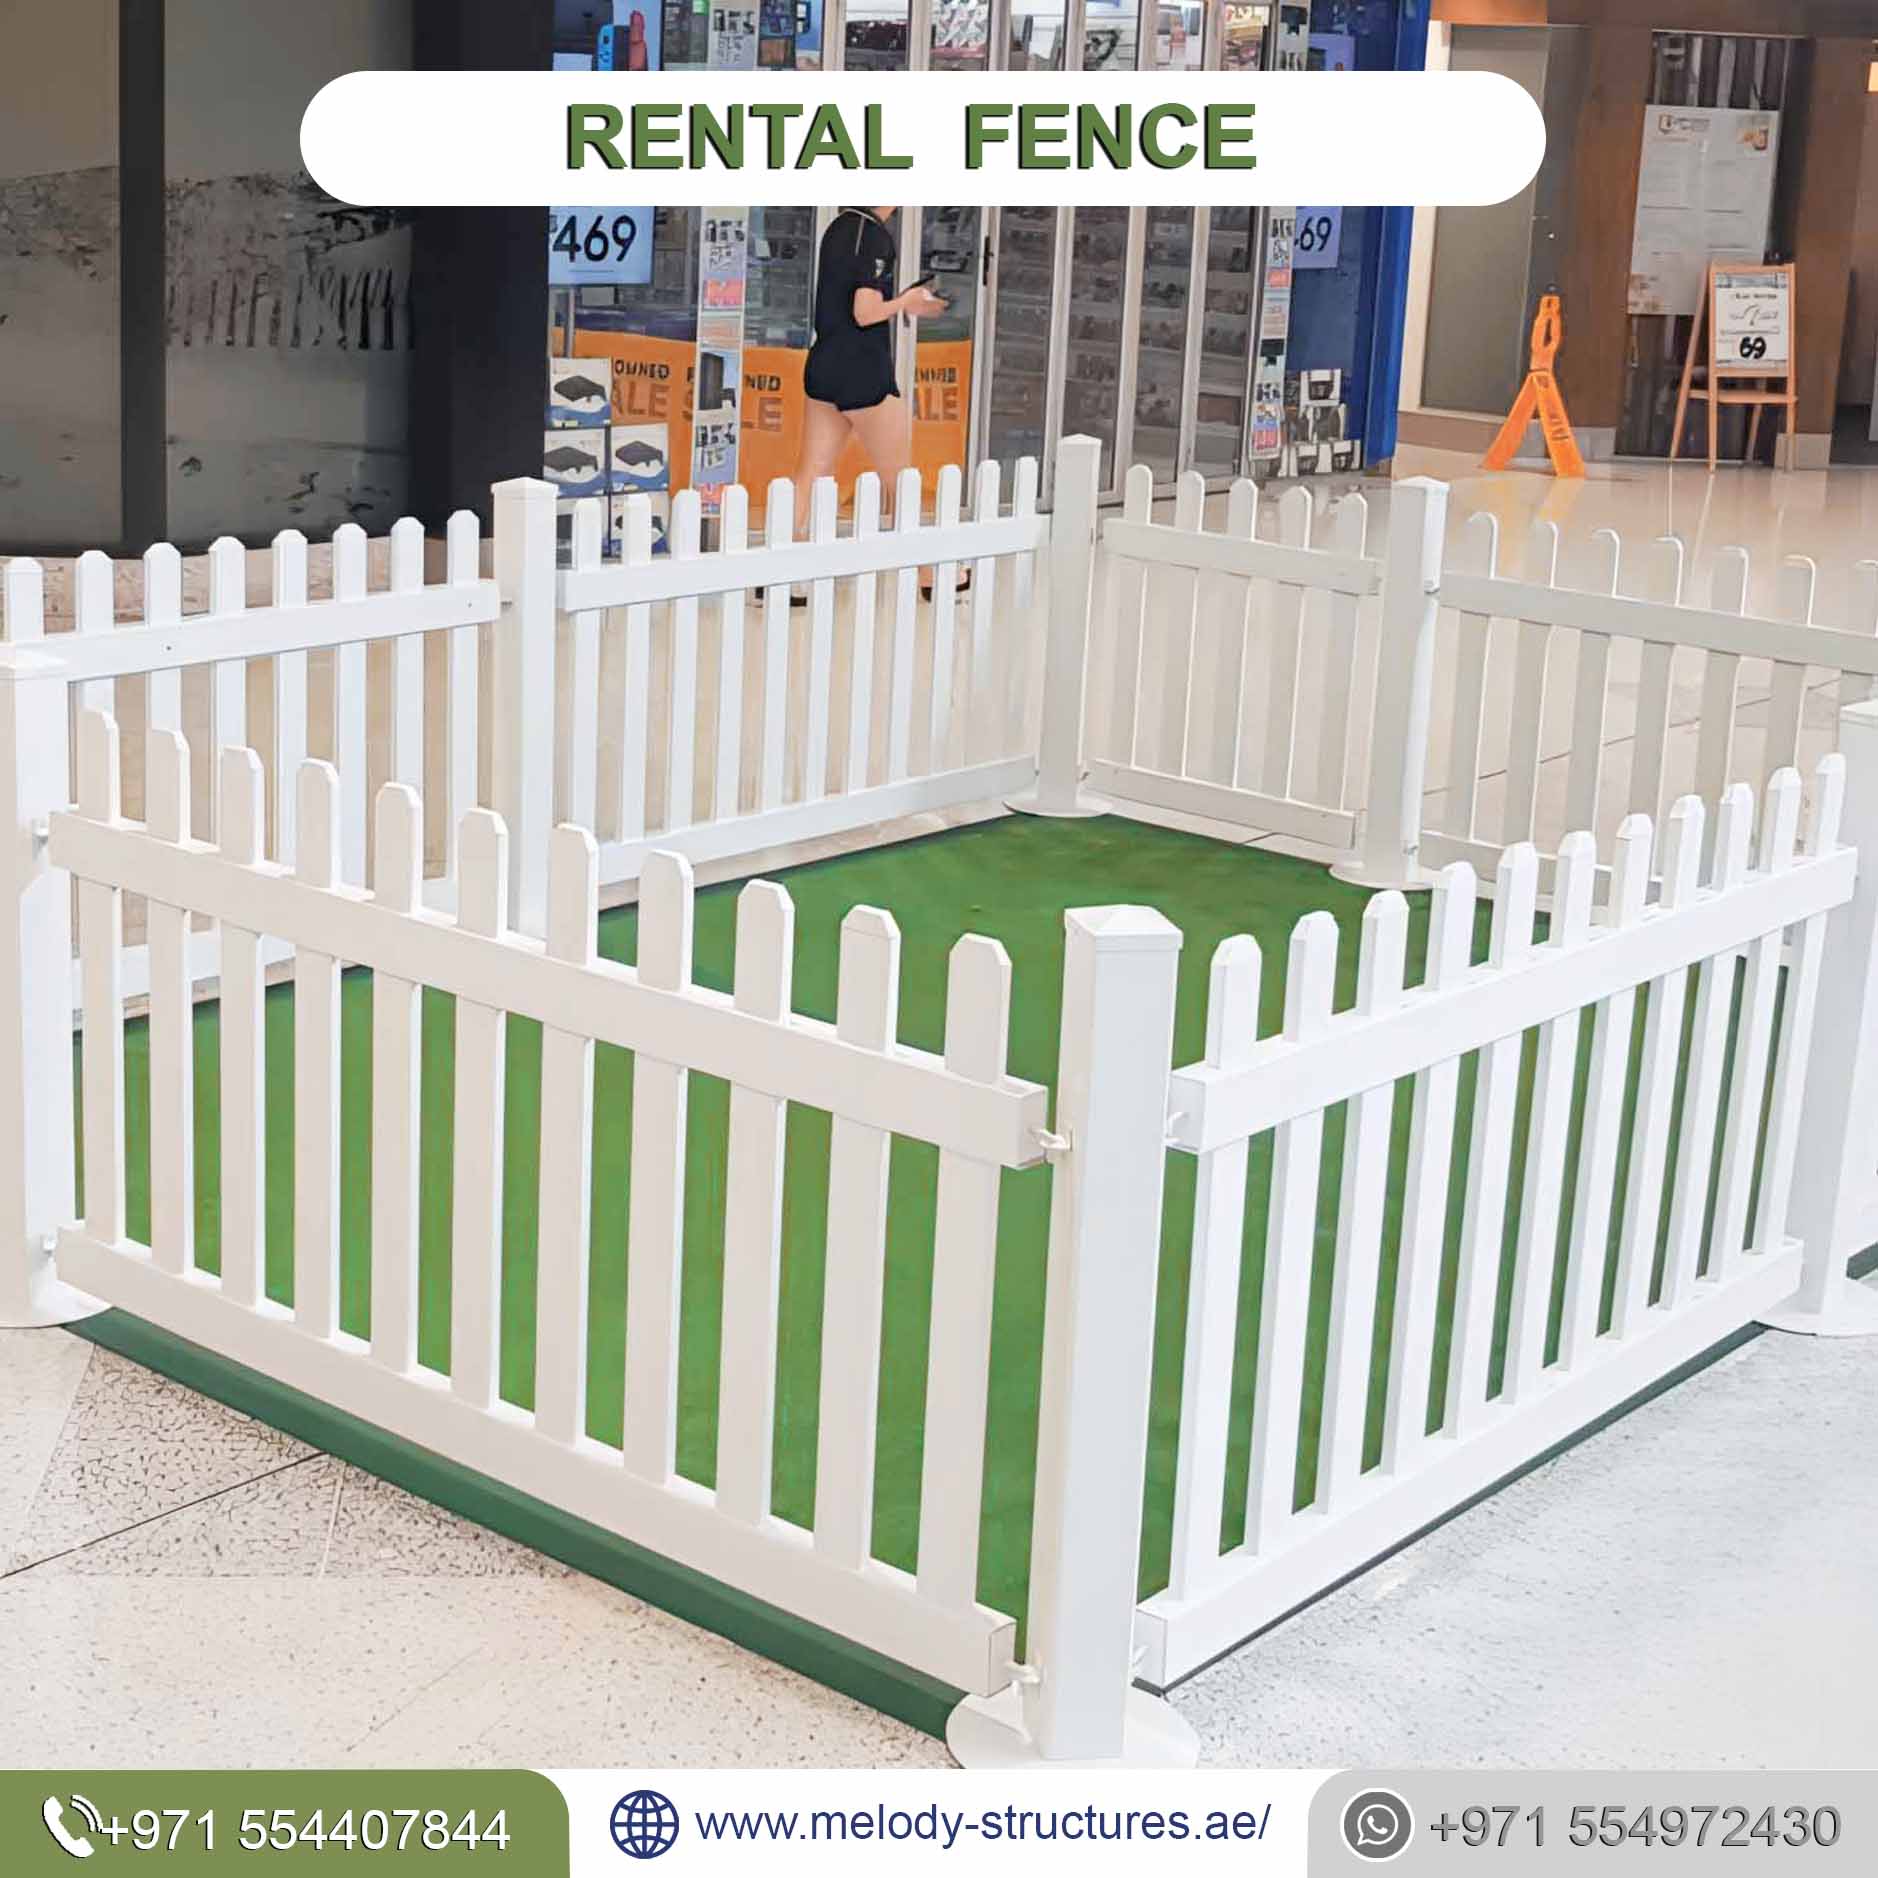 Temporary Fence | Rental Fence in UAE